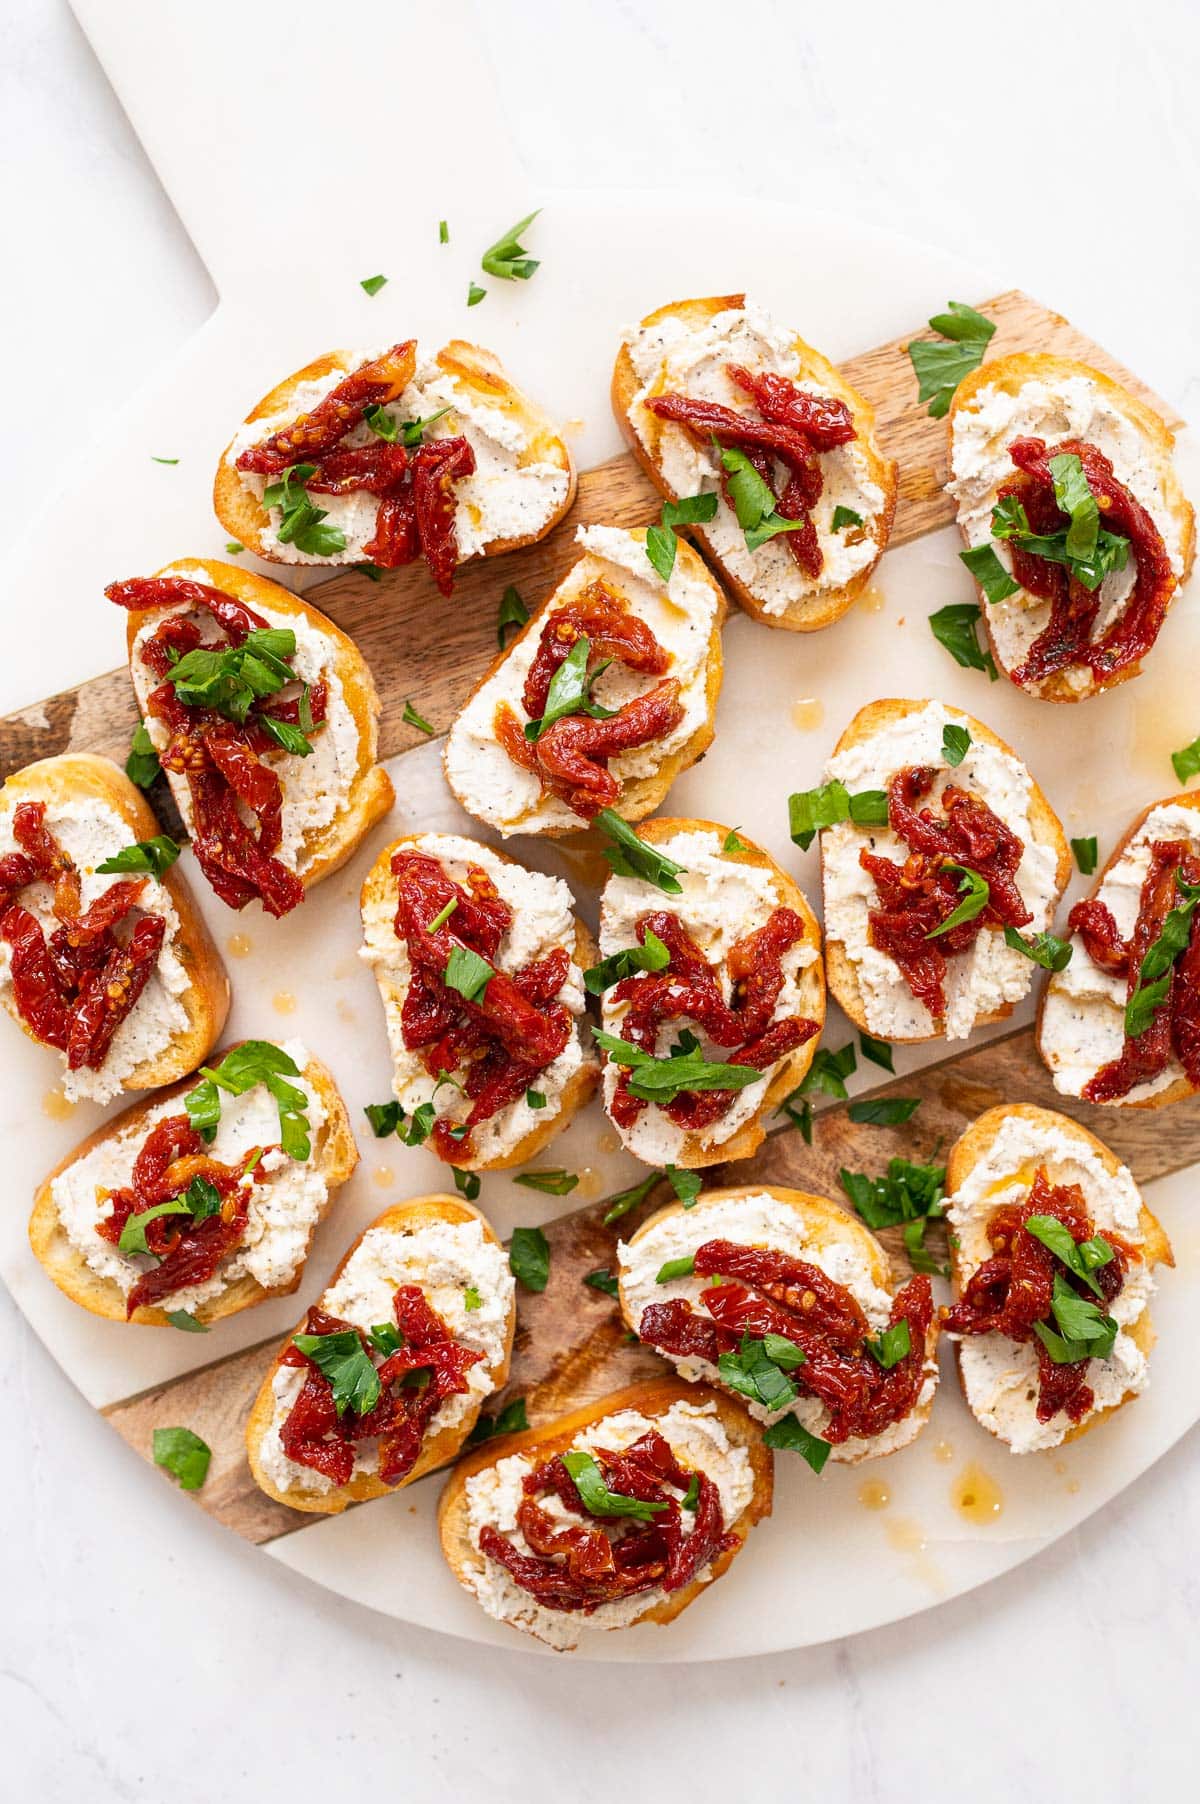 Crostini appetizers with sun dried tomatoes and parsley on marble board.